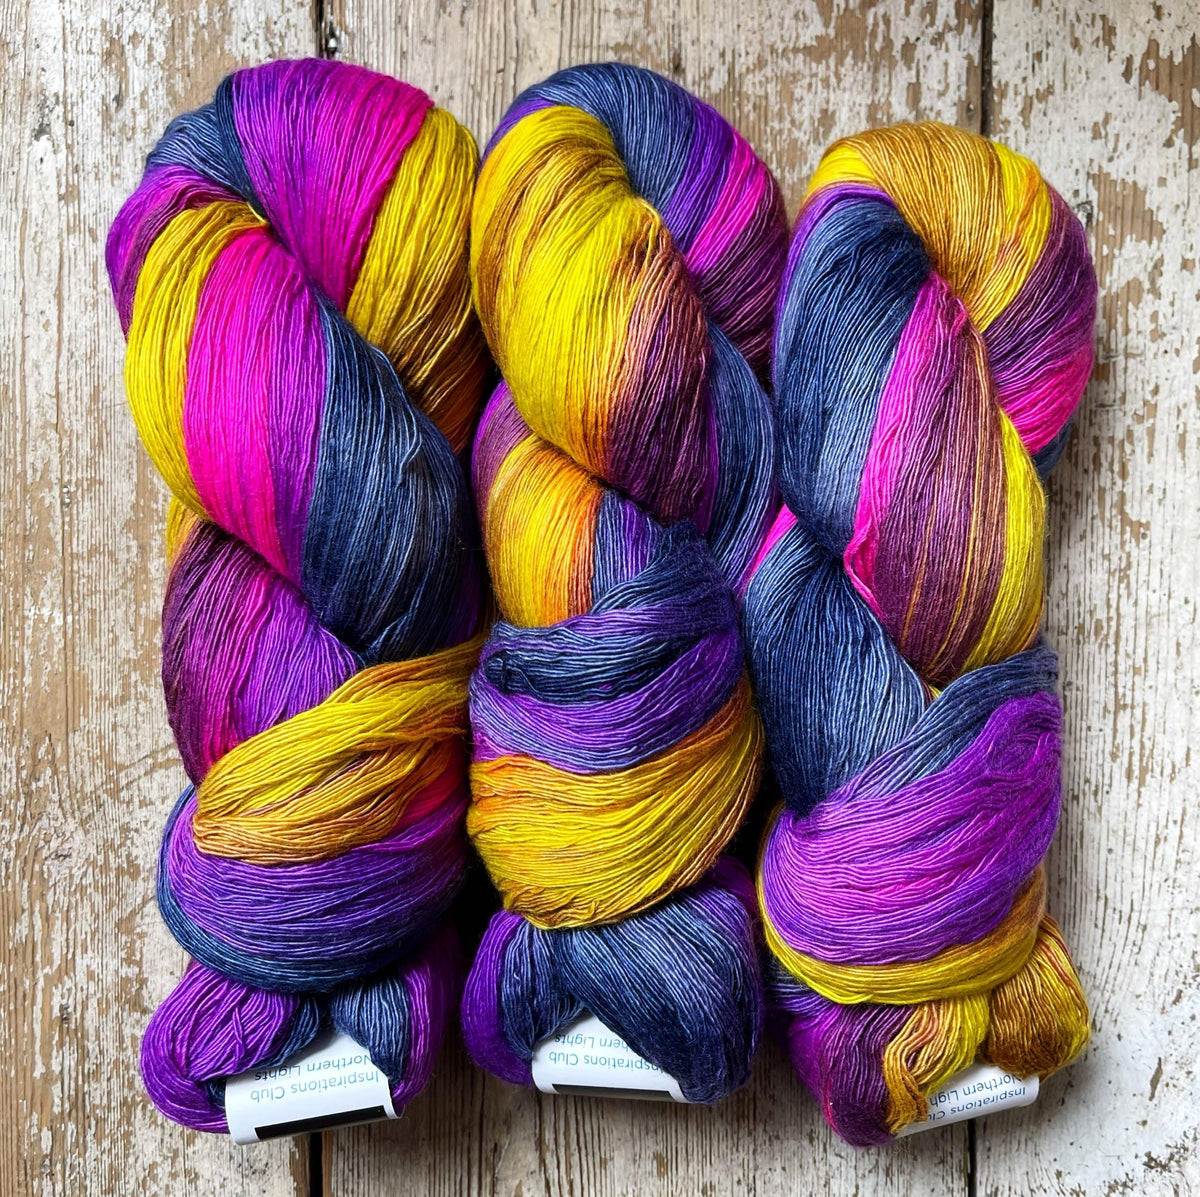 Cashmere Yarn at WEBS